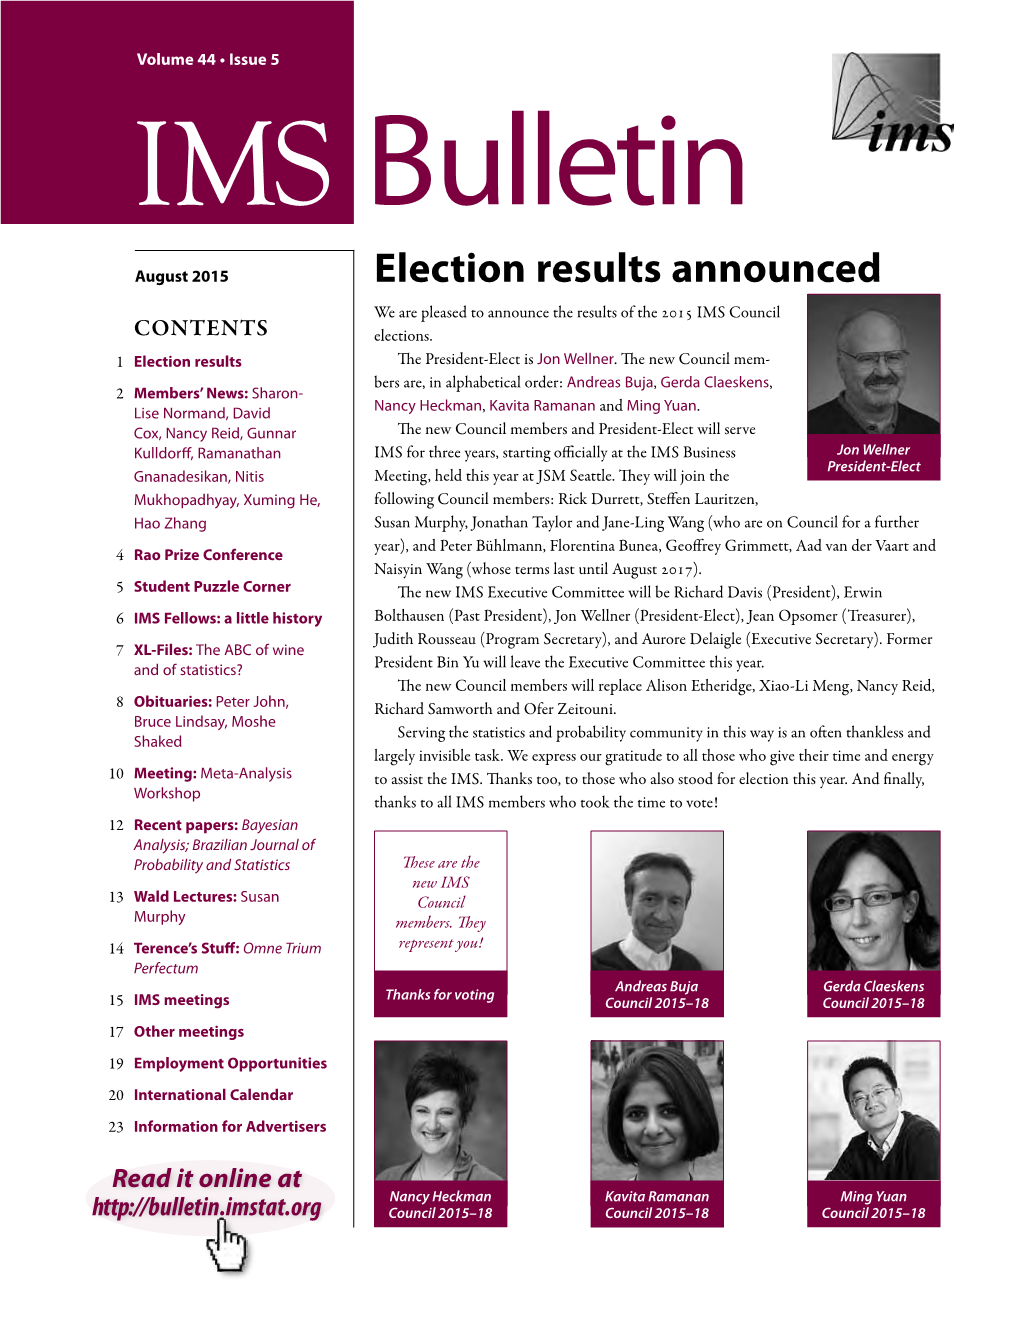 Election Results Announced We Are Pleased to Announce the Results of the 2015 IMS Council Contents Elections